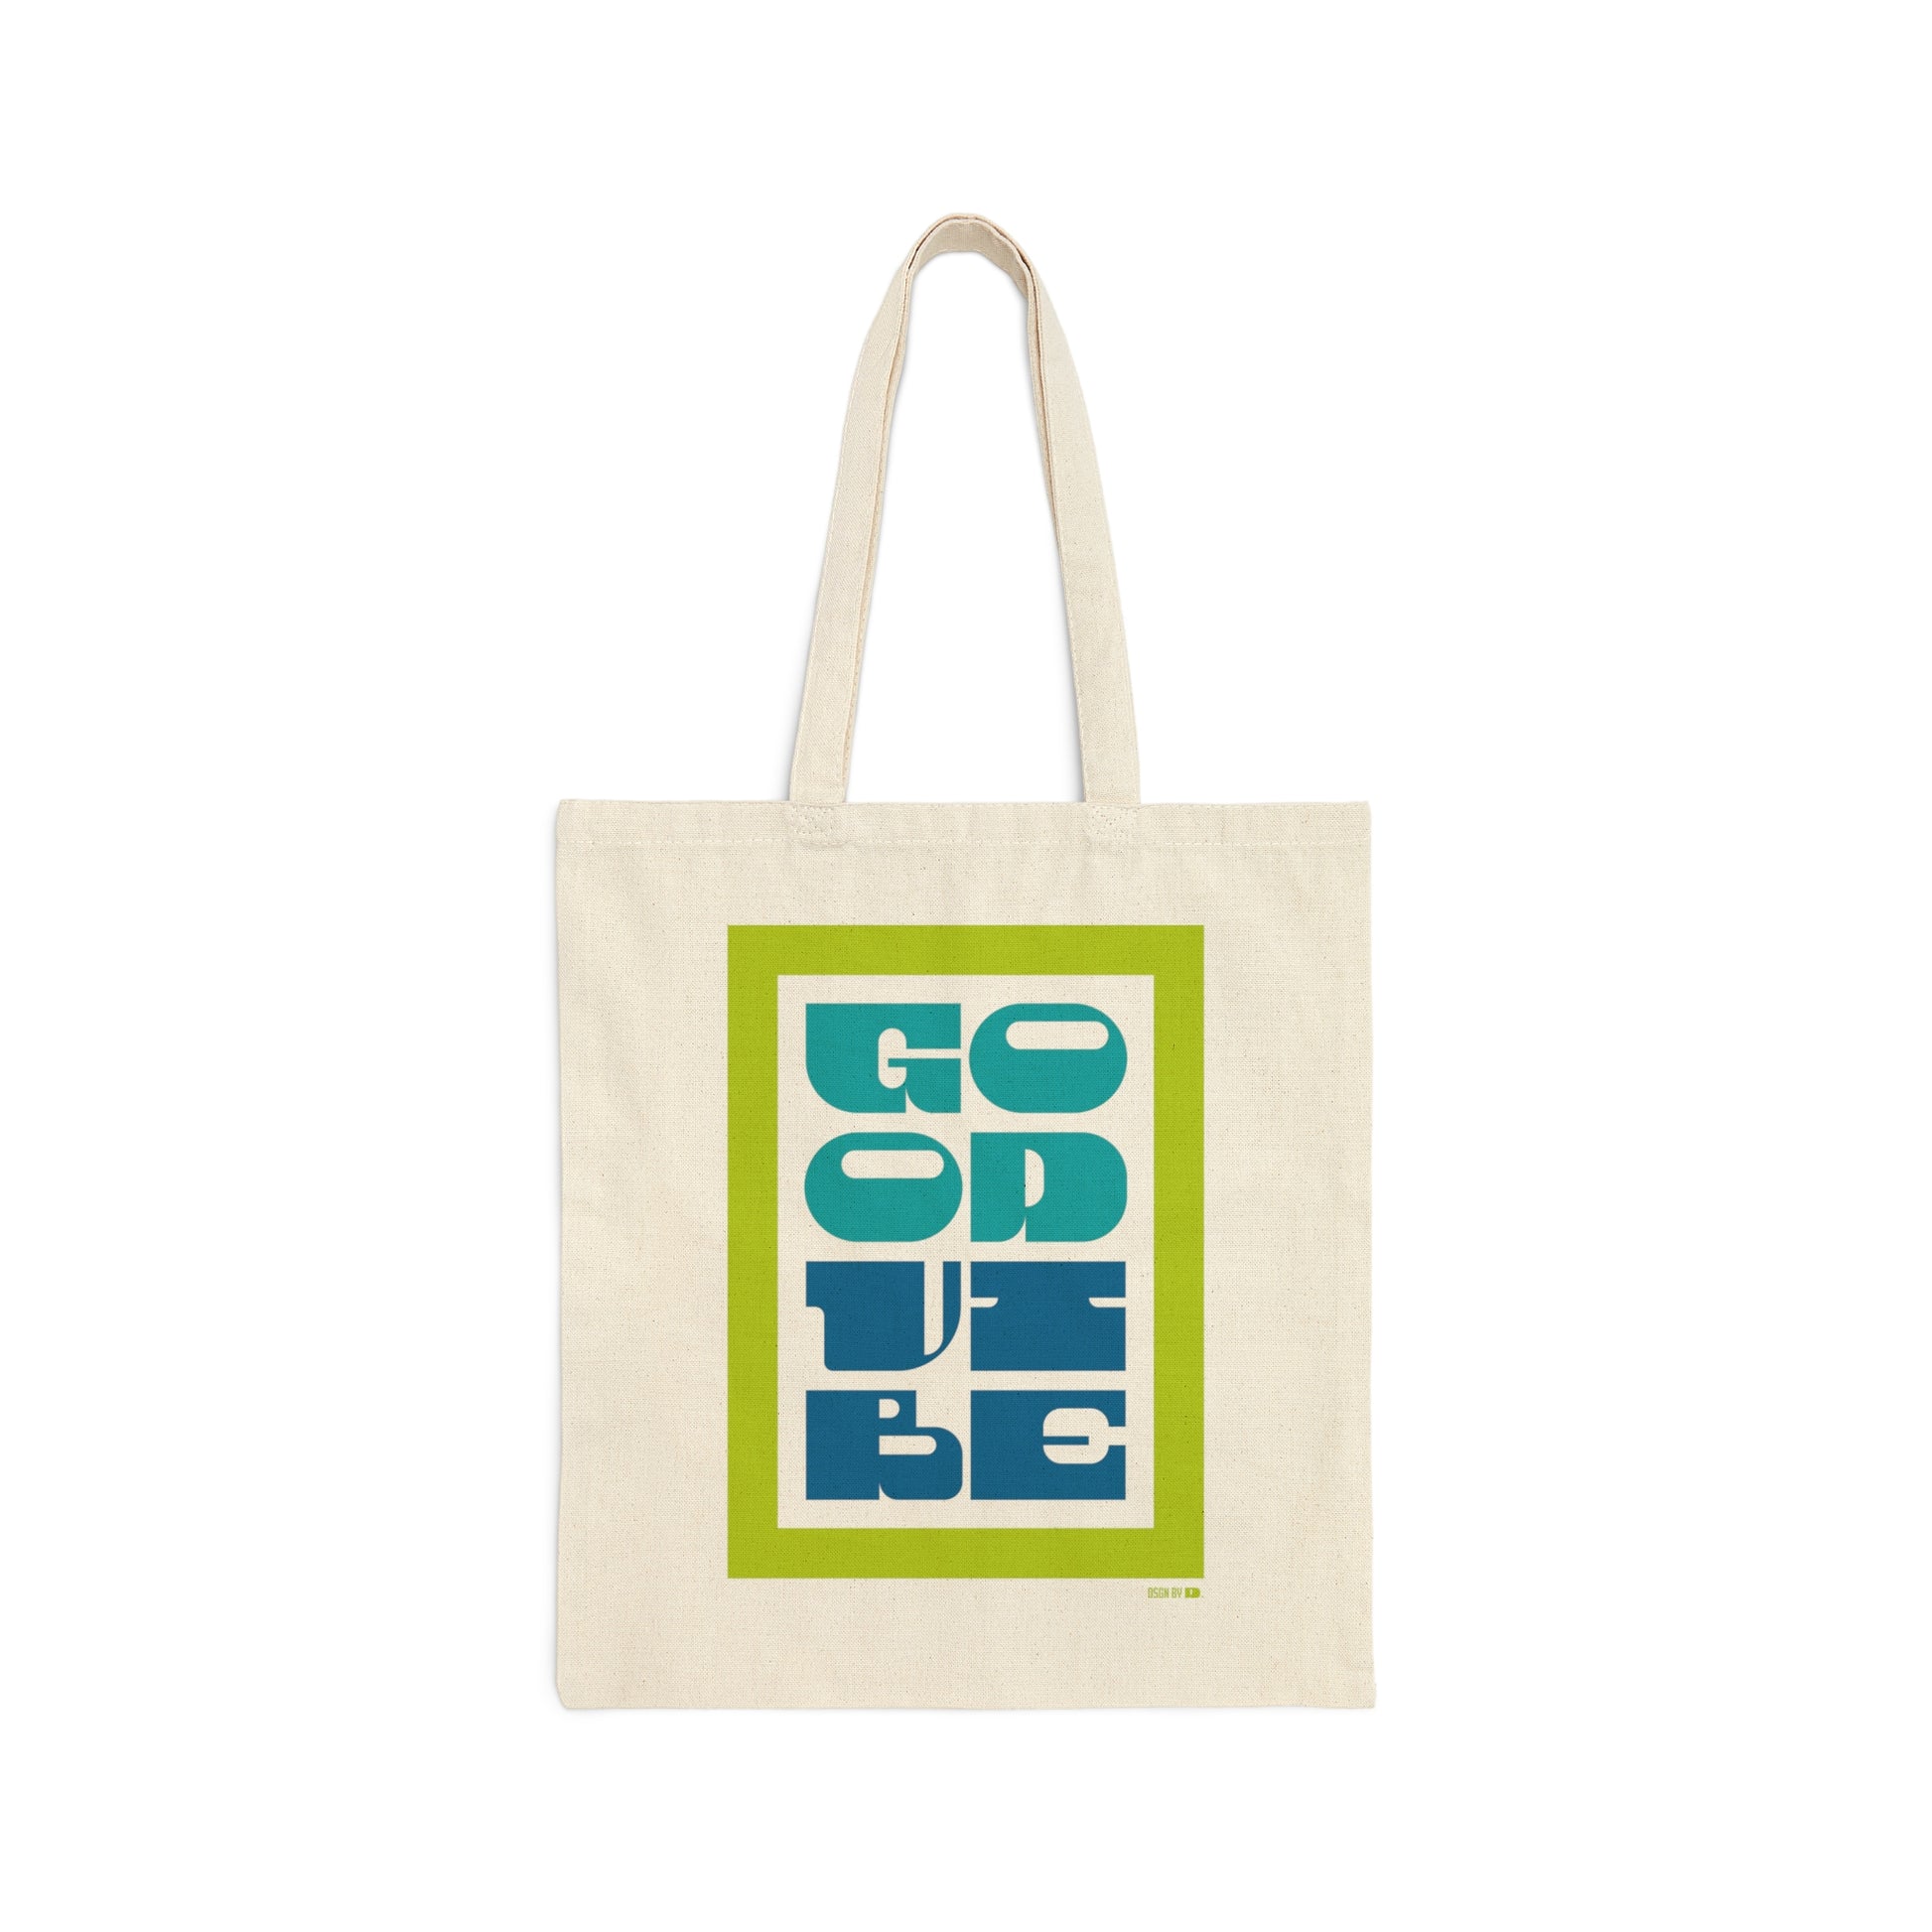 Cotton canvas tote bag with green, teal, and blue type saying "Good Vibe."